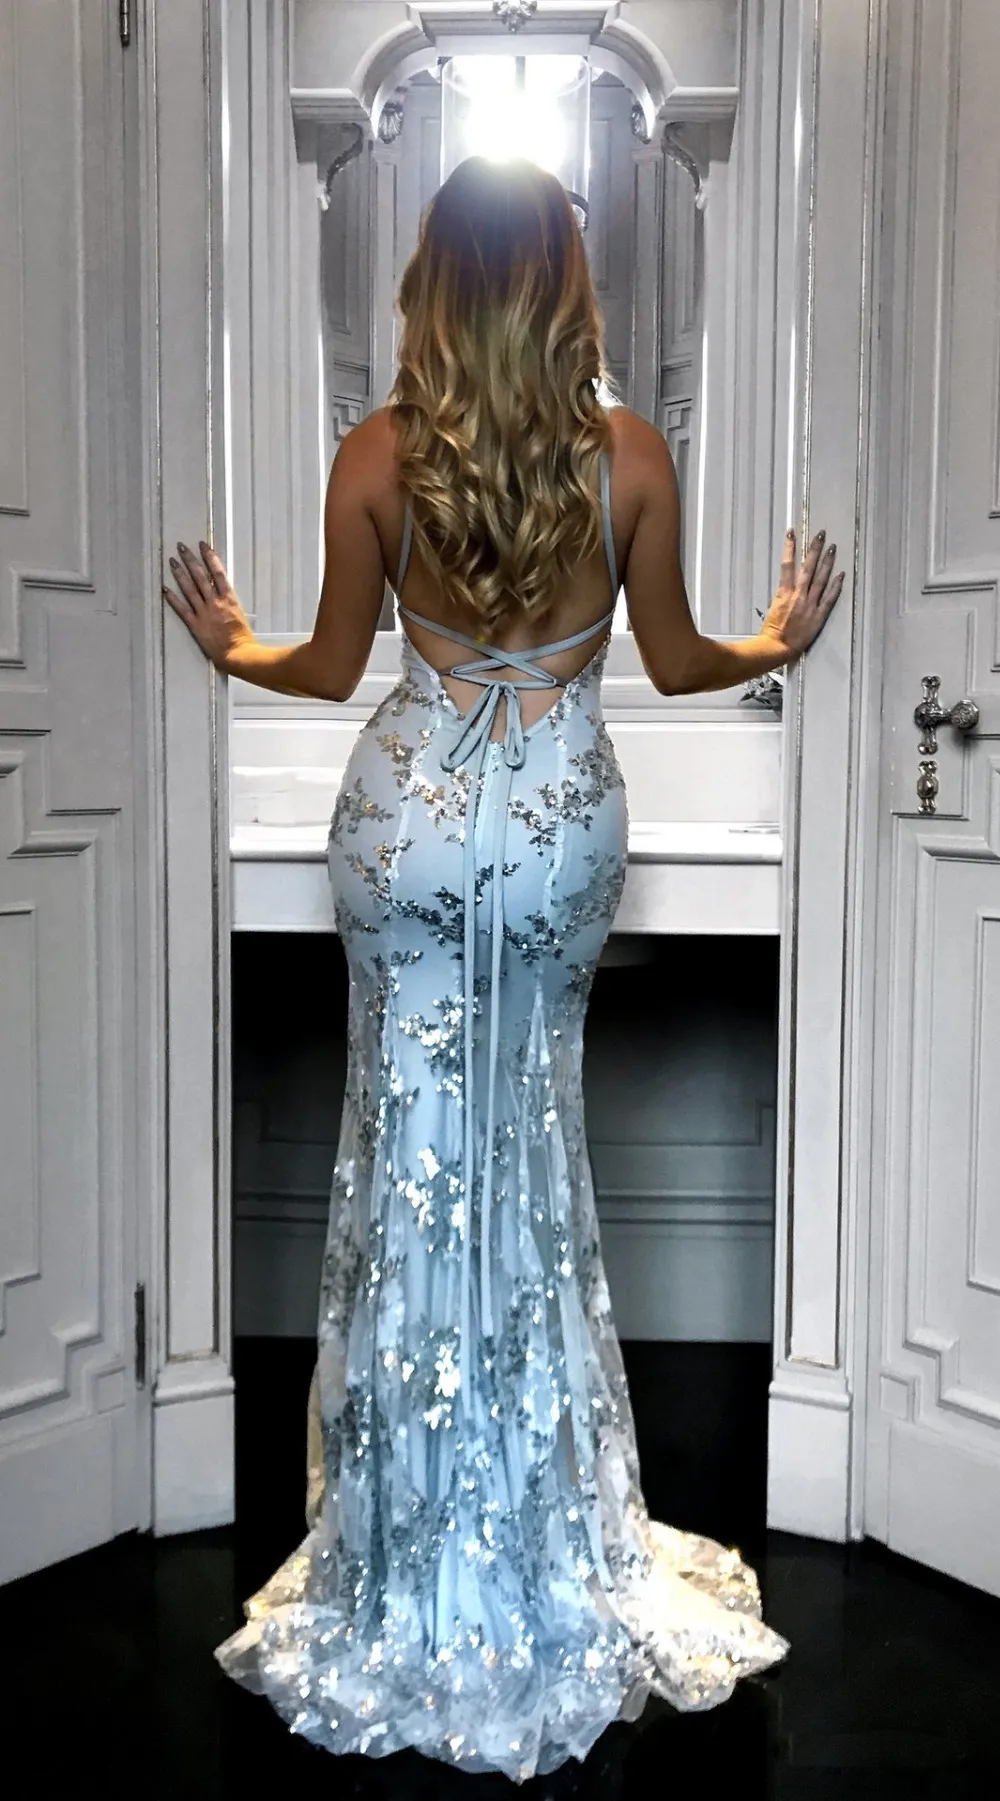 2018 Sexy Graceful V Neck Spahetti Straps Sequins Mermaid Long Prom Dress Silver Backless Evening Dresses Female Maxi Party Dress 9207365